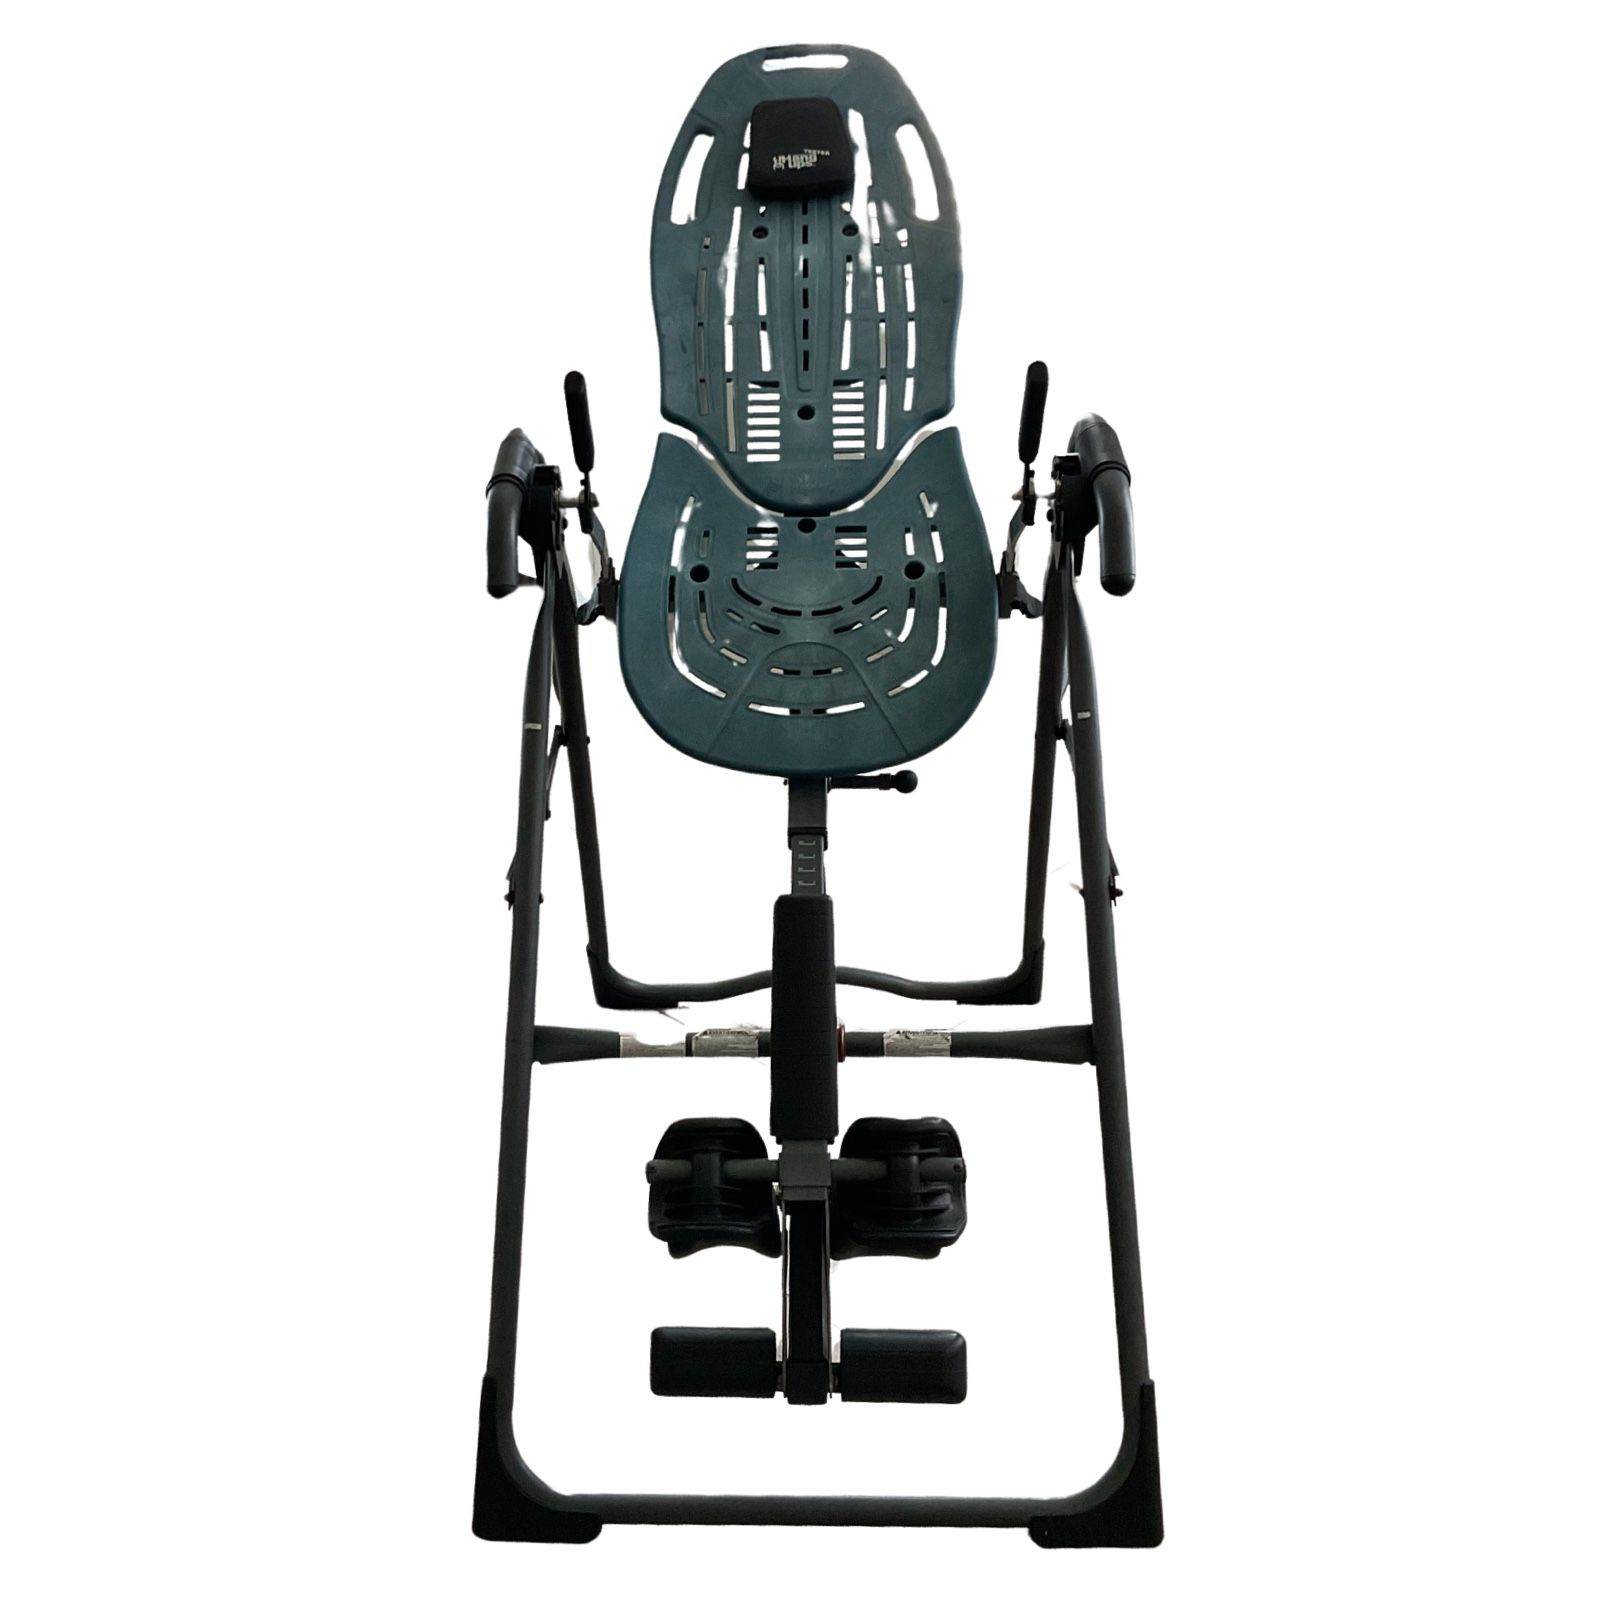 Teeter Inversion Table for Back Pain